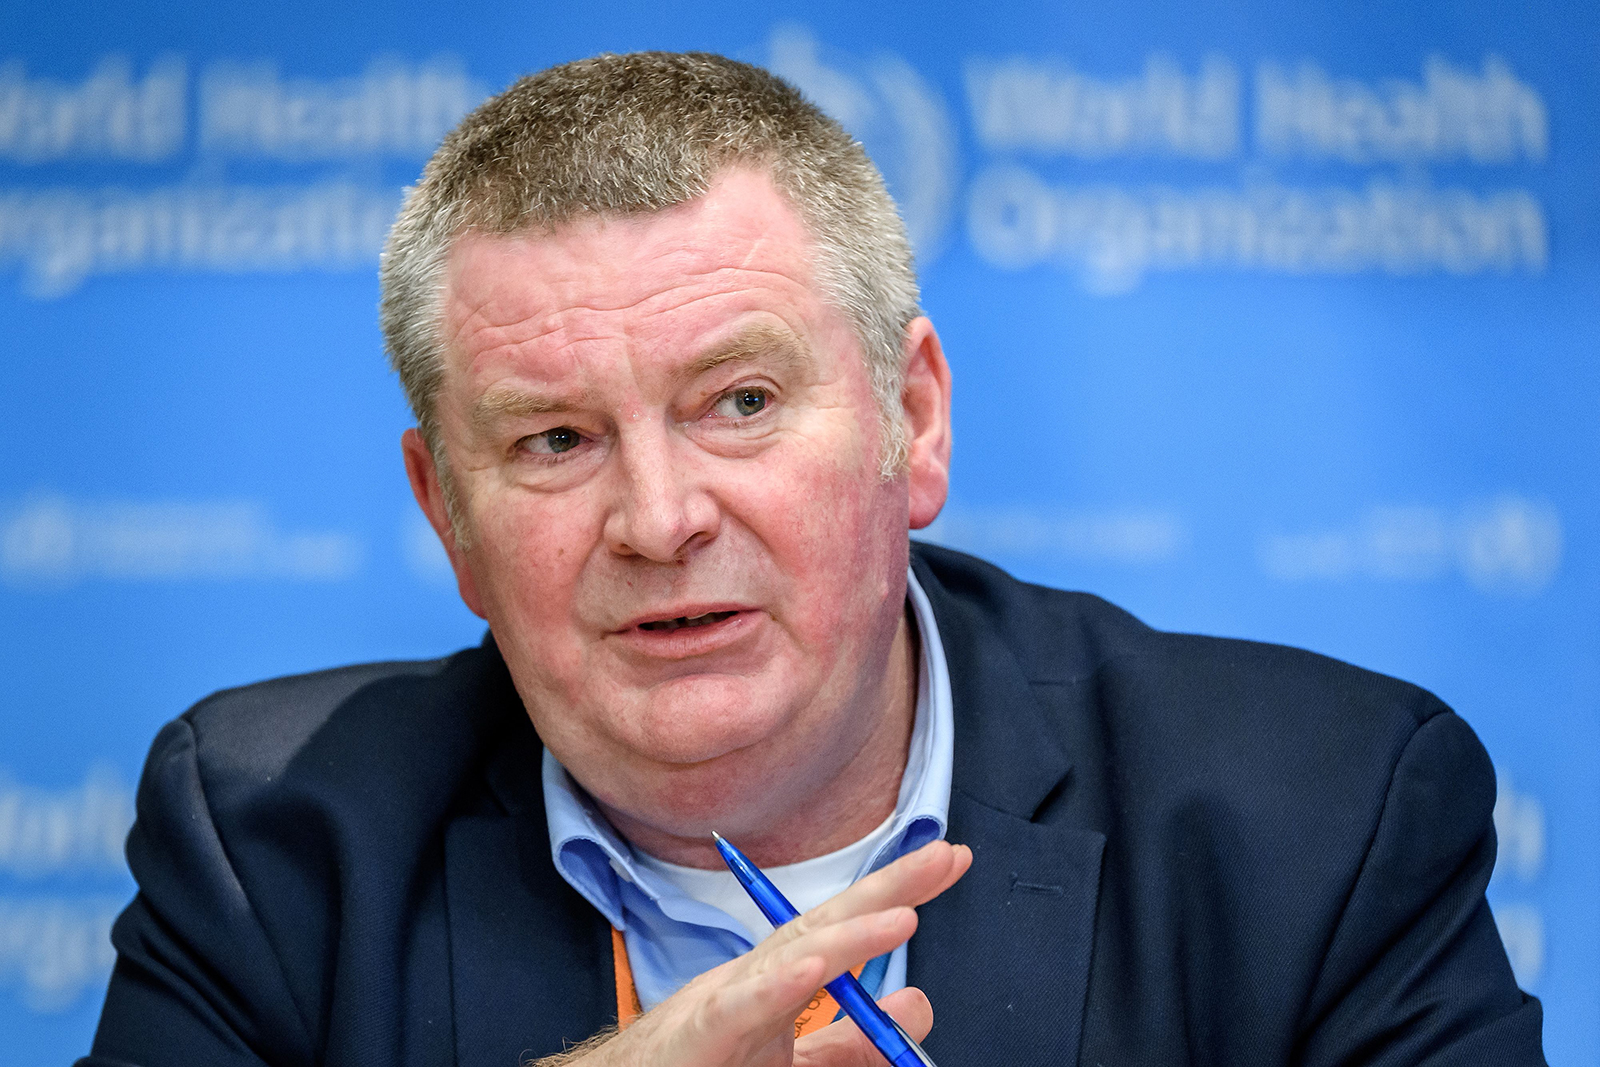 Dr. Michael Ryan talks during a daily press briefing on COVID-19 at the WHO heardquaters in Geneva, Switzerland on March 11.